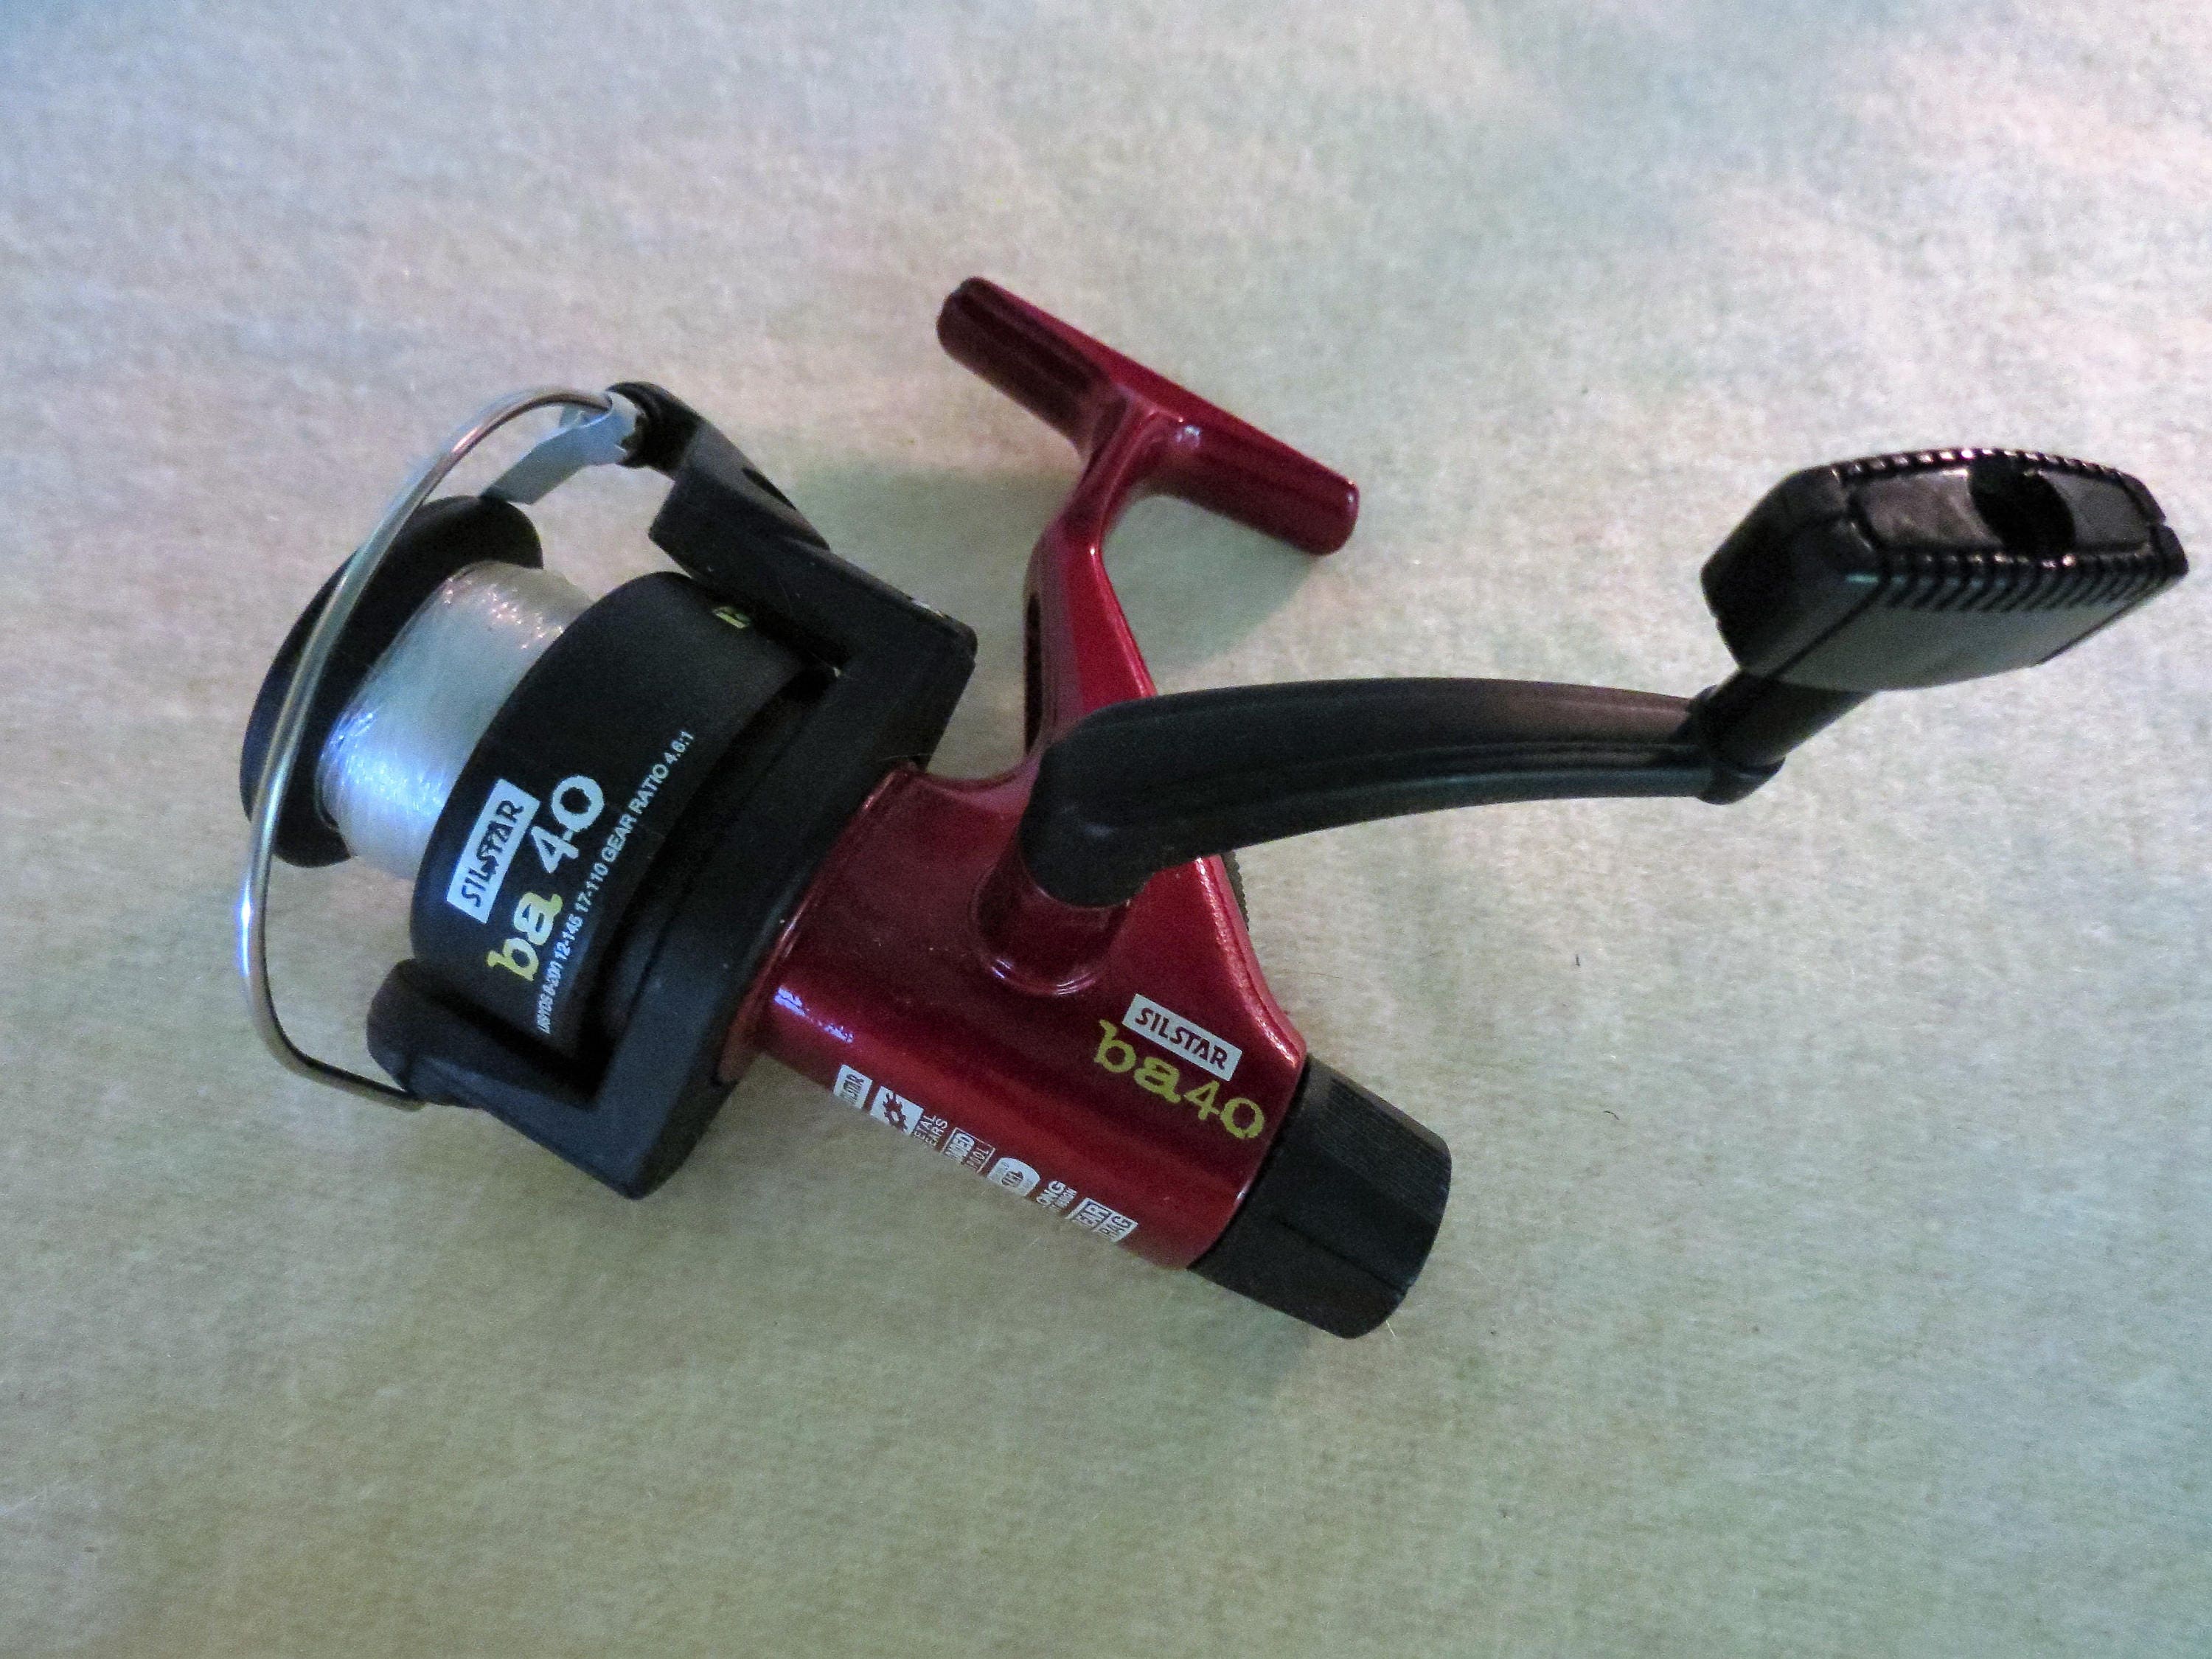 Basic Fish Bonz Silstar Ba 40 Fishing Reel Never Used Excellent Condition 